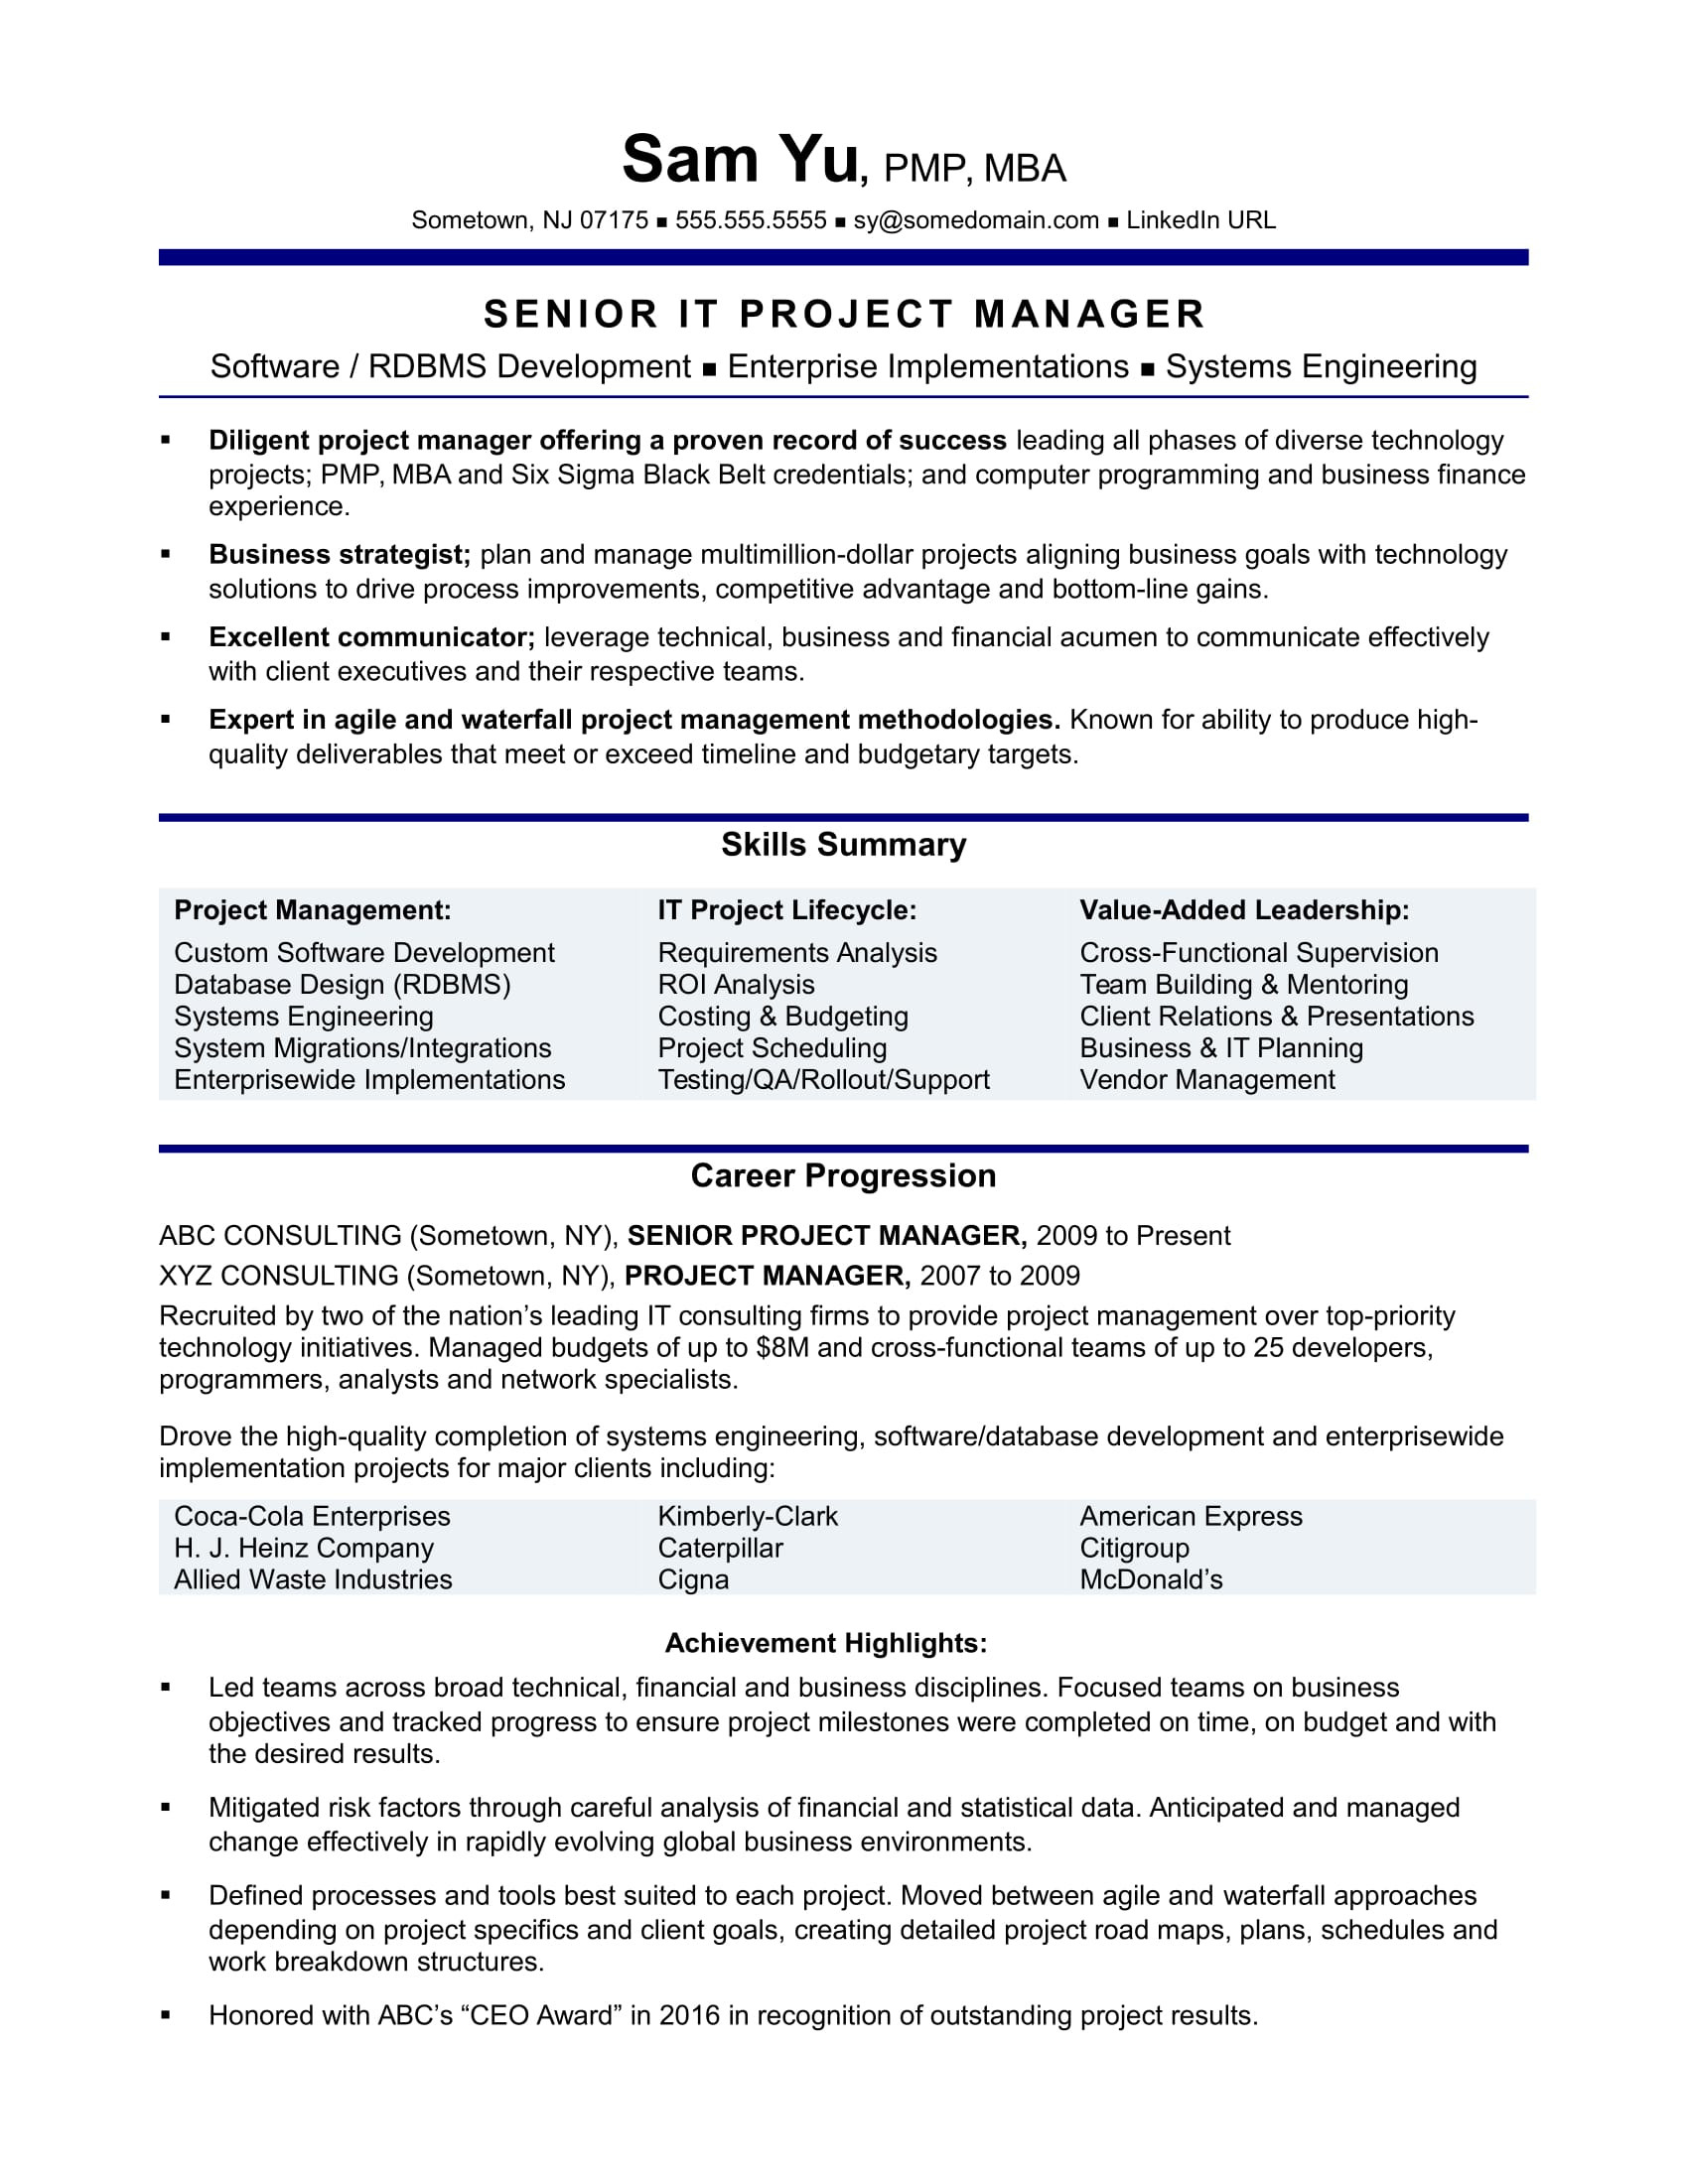 Instructional Systems Specialist Federal Resume Sample with Salary and Hours It Project Manager Resume Monster.com